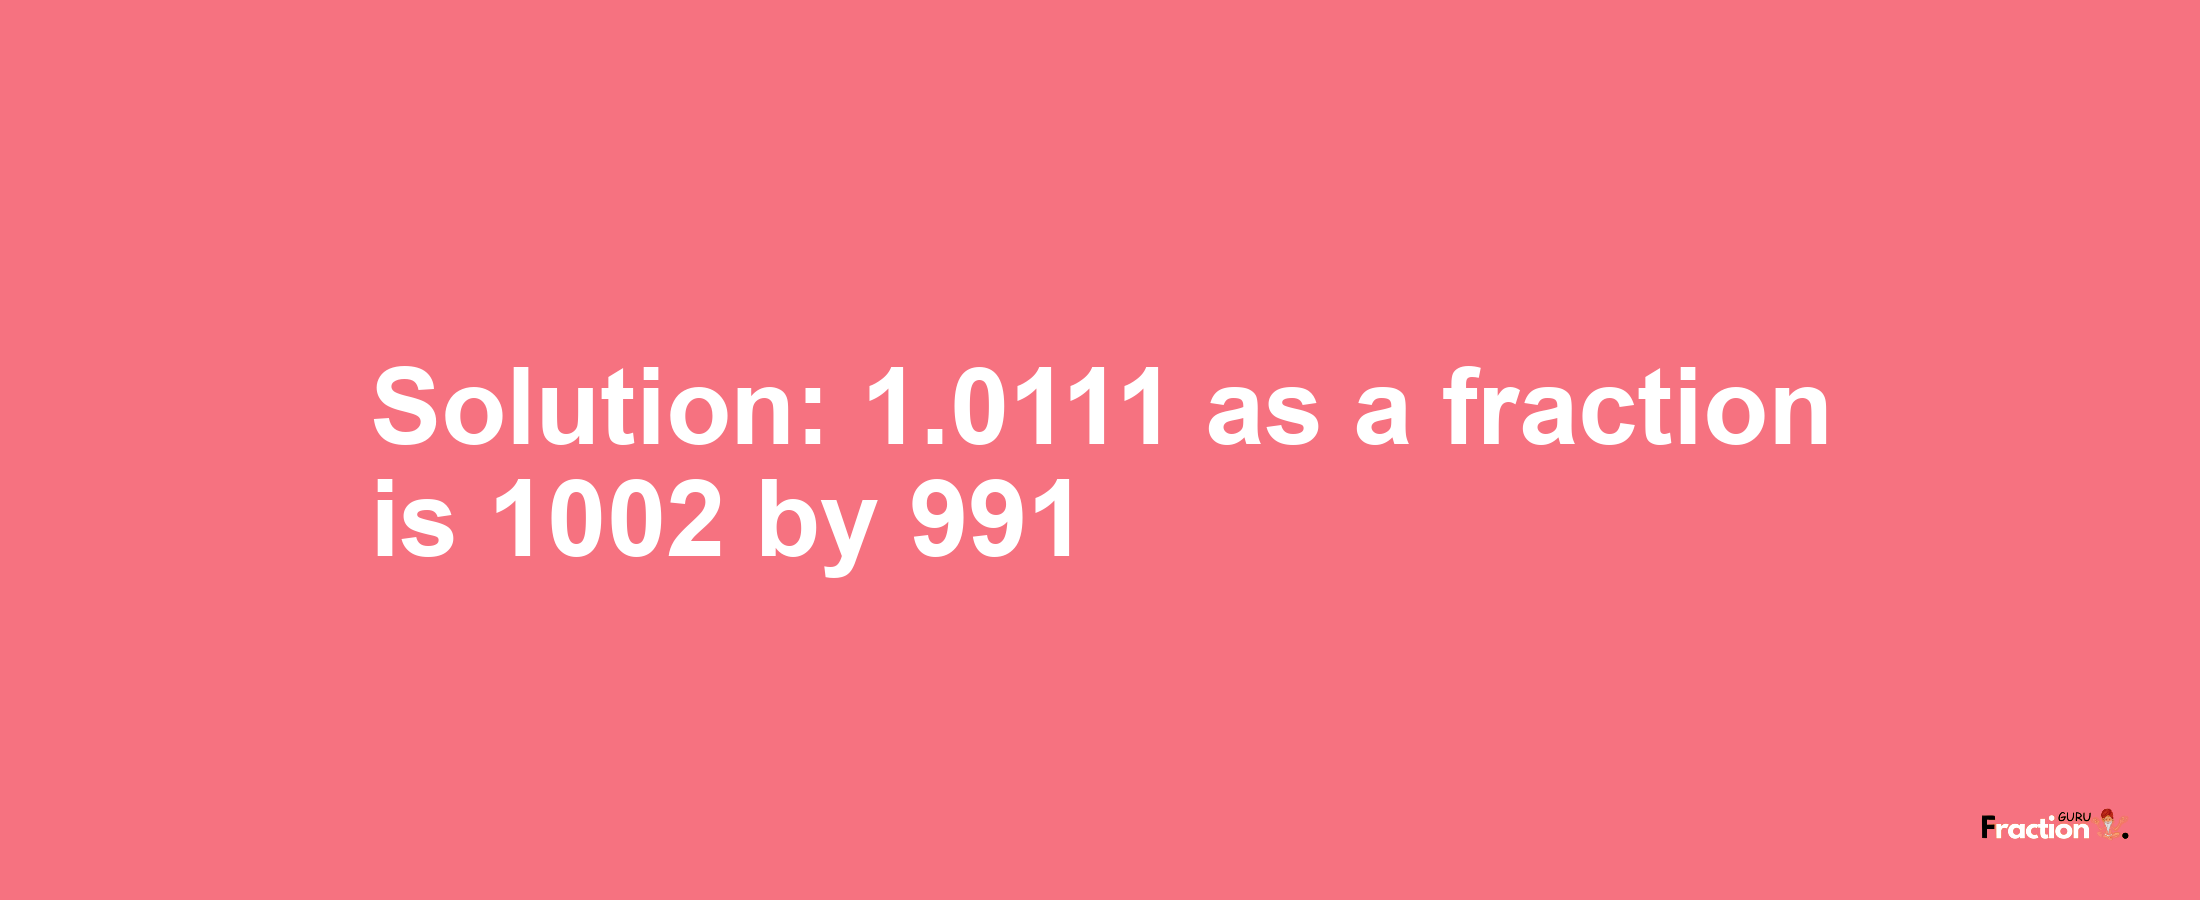 Solution:1.0111 as a fraction is 1002/991